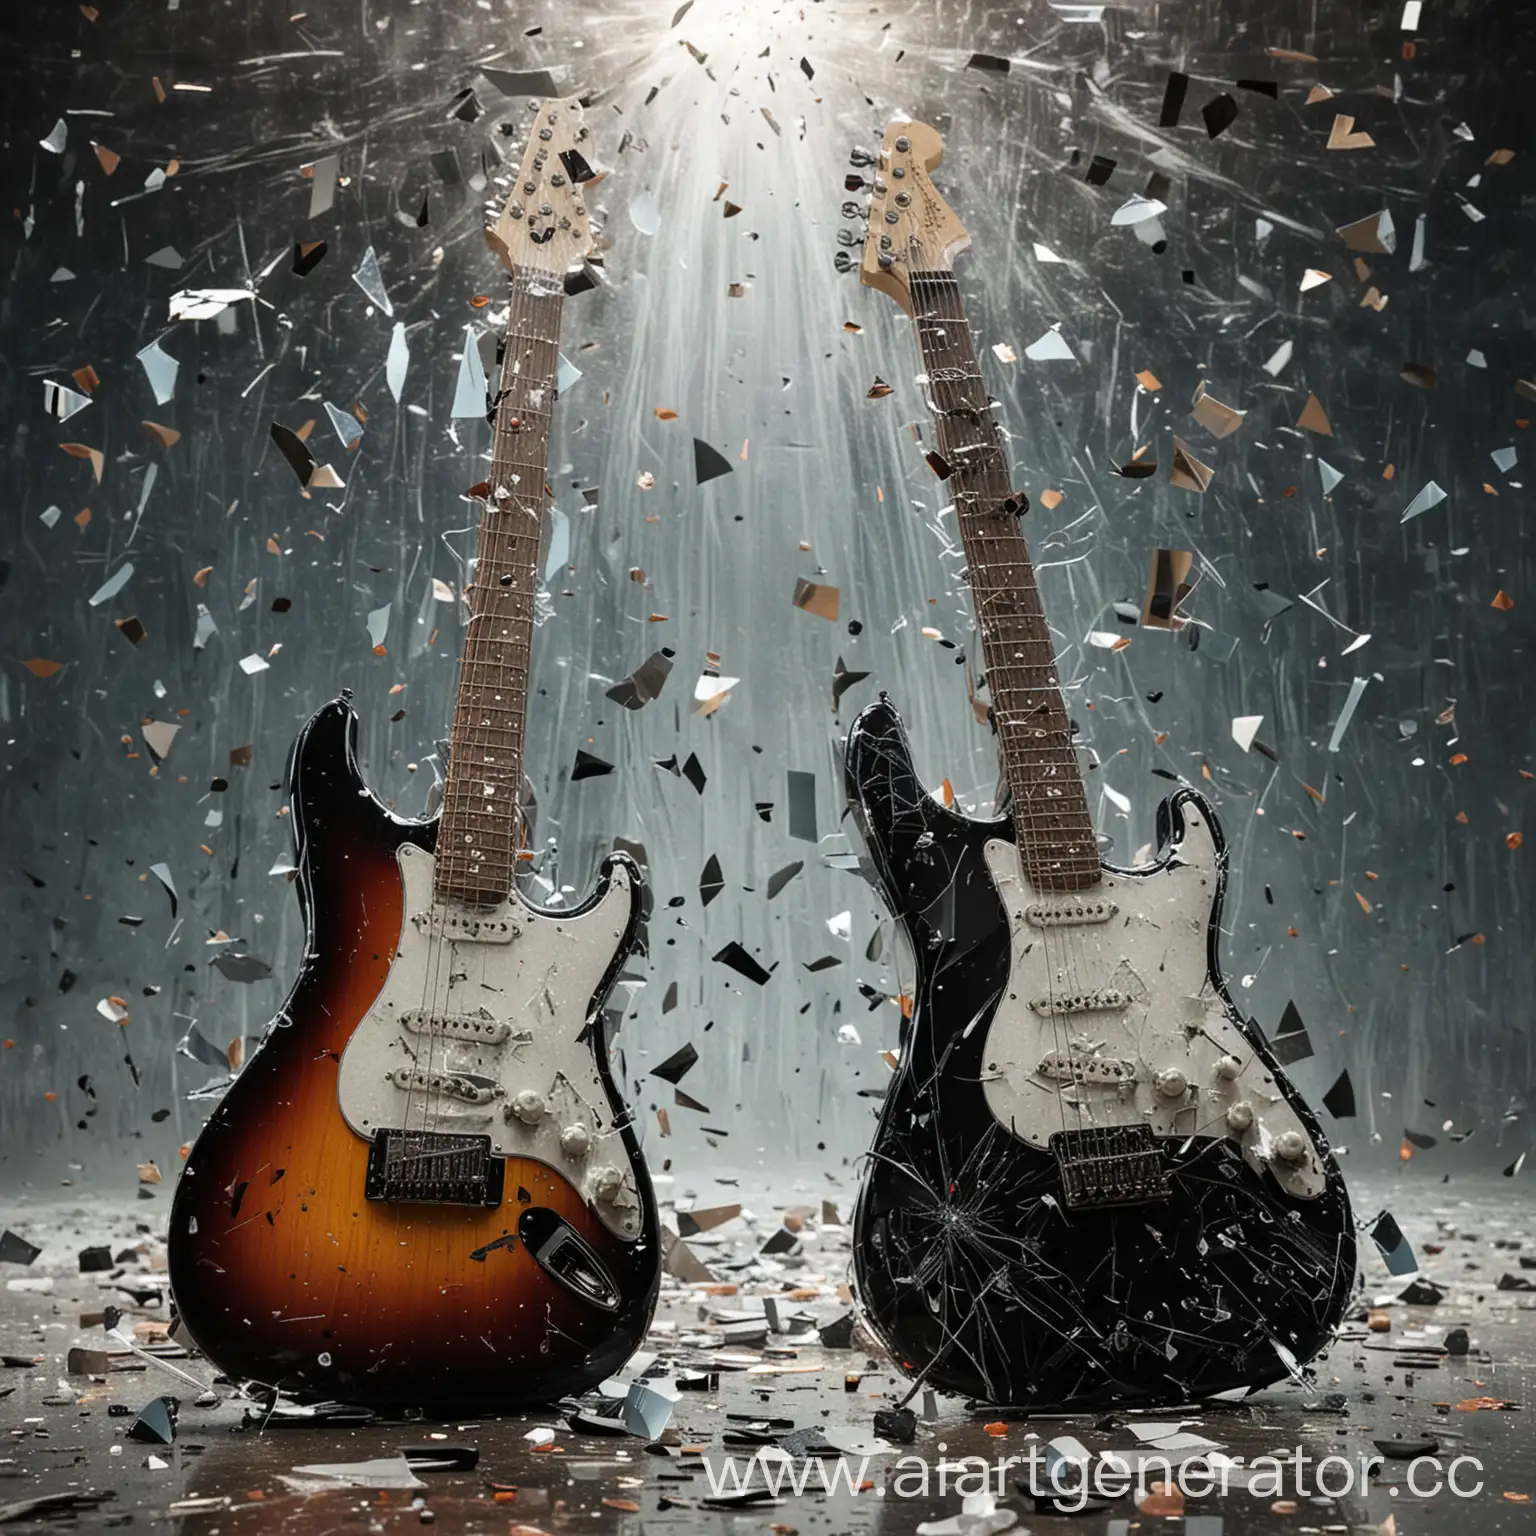 Electric-Guitar-and-Bass-Guitar-in-Front-of-Shattered-Glass-Explosion